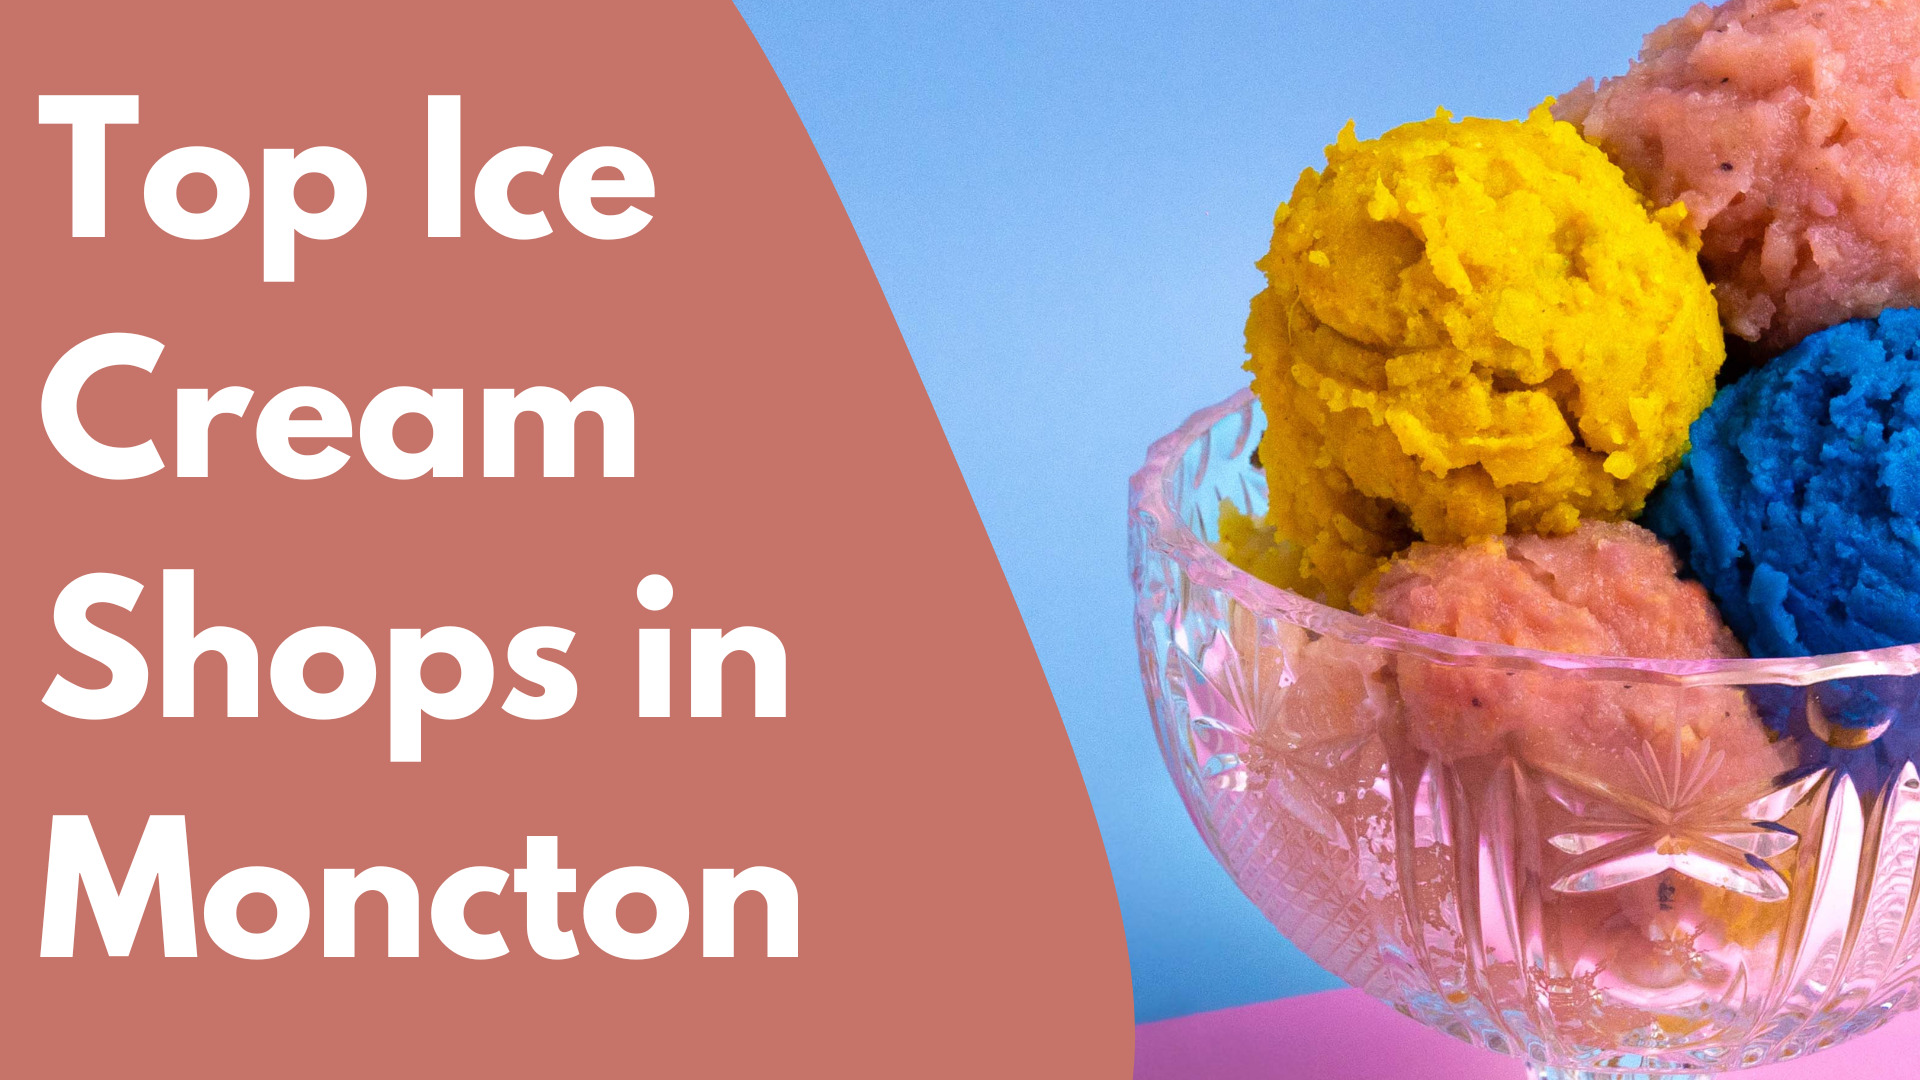 Where Is The Best Place To Go For Ice Cream In Moncton?